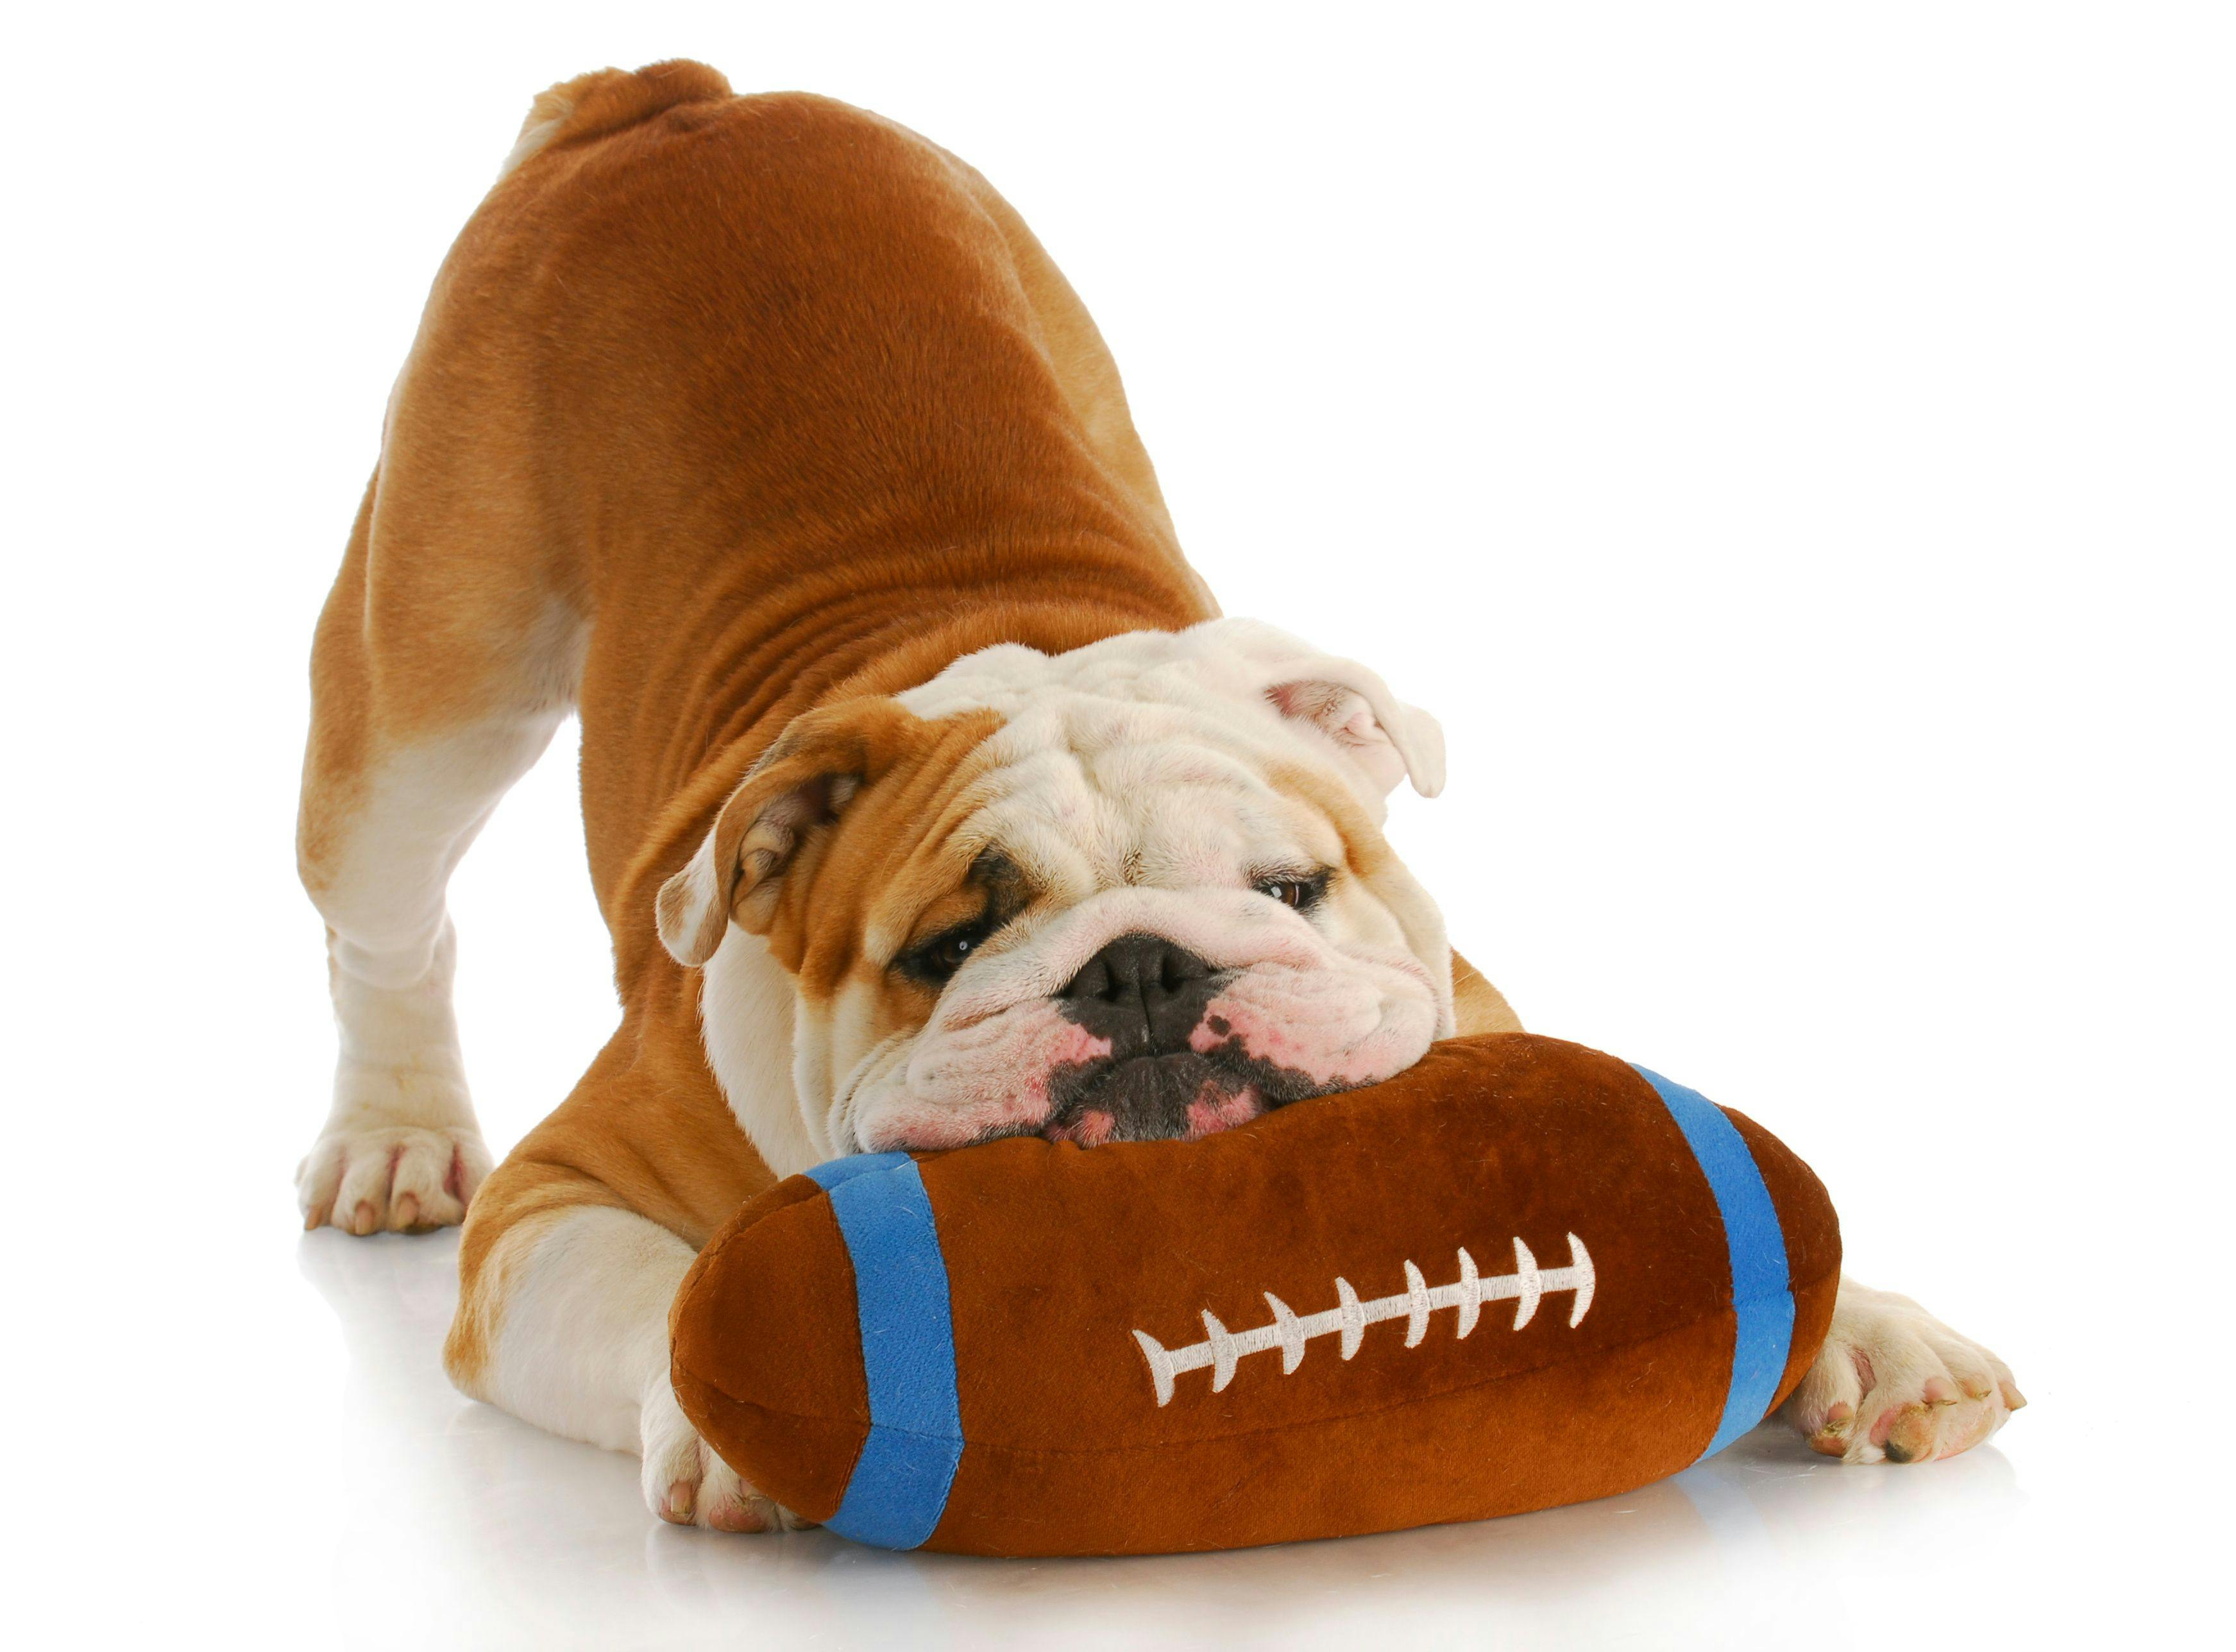 Pet safety for this Super Bowl Sunday